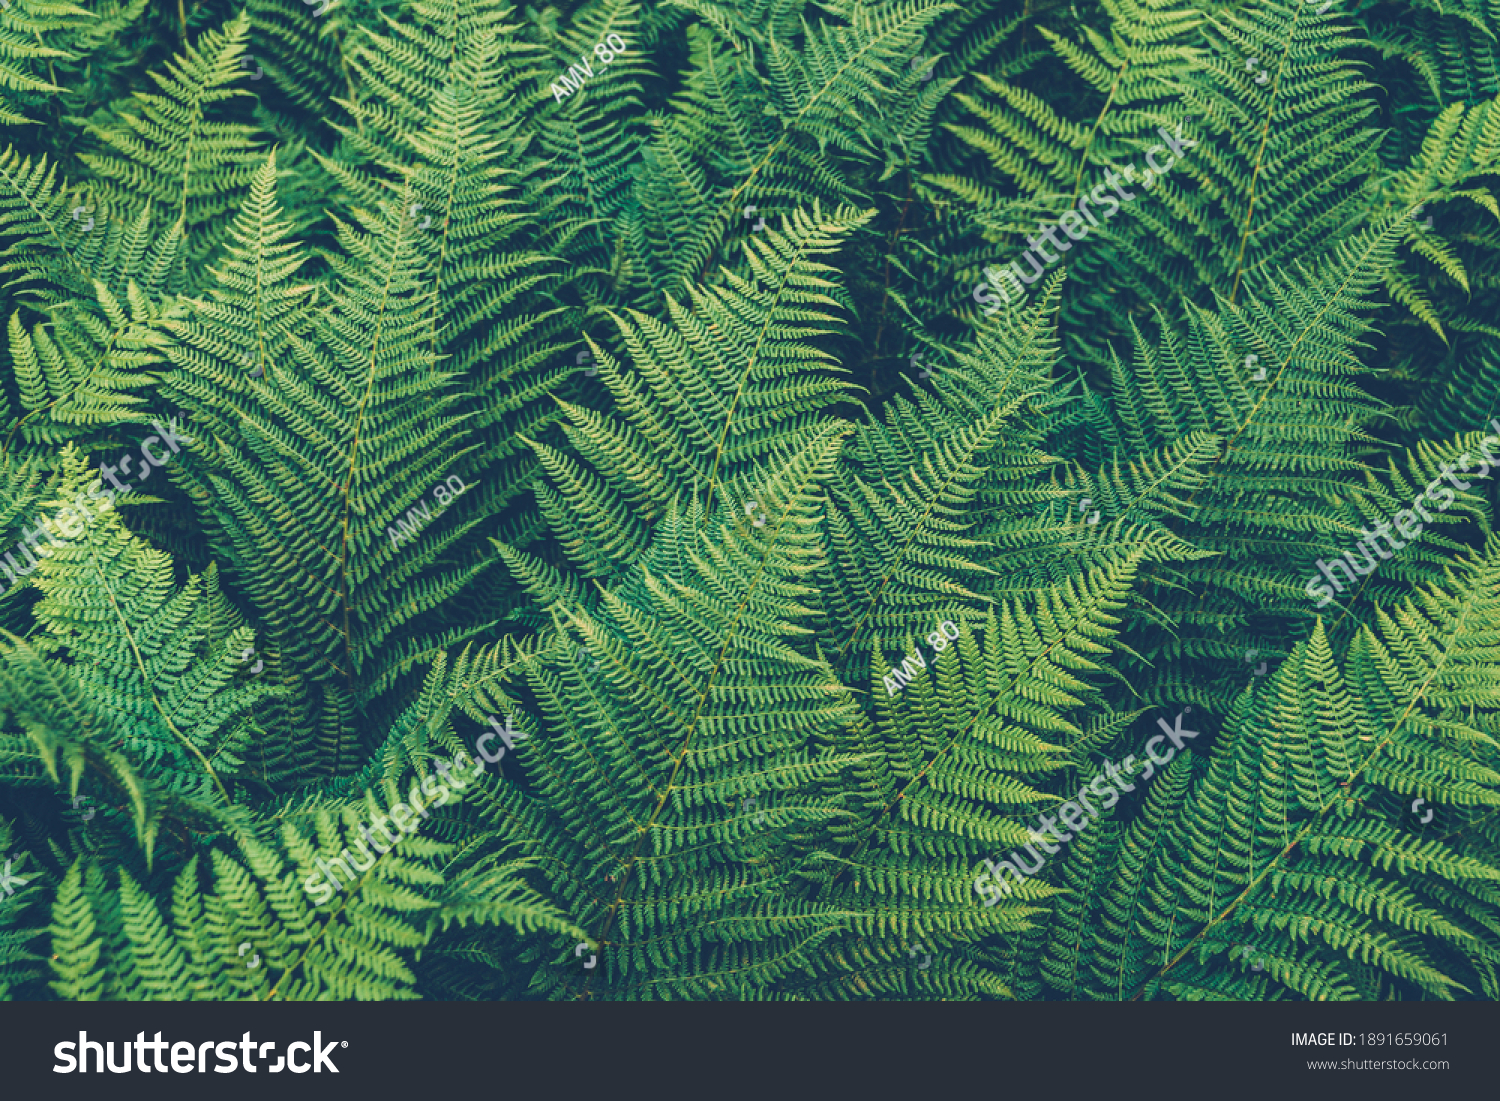 Thickets of fern. Green leaf cover in rainforest. Scenic natural texture of fern leaves. #1891659061